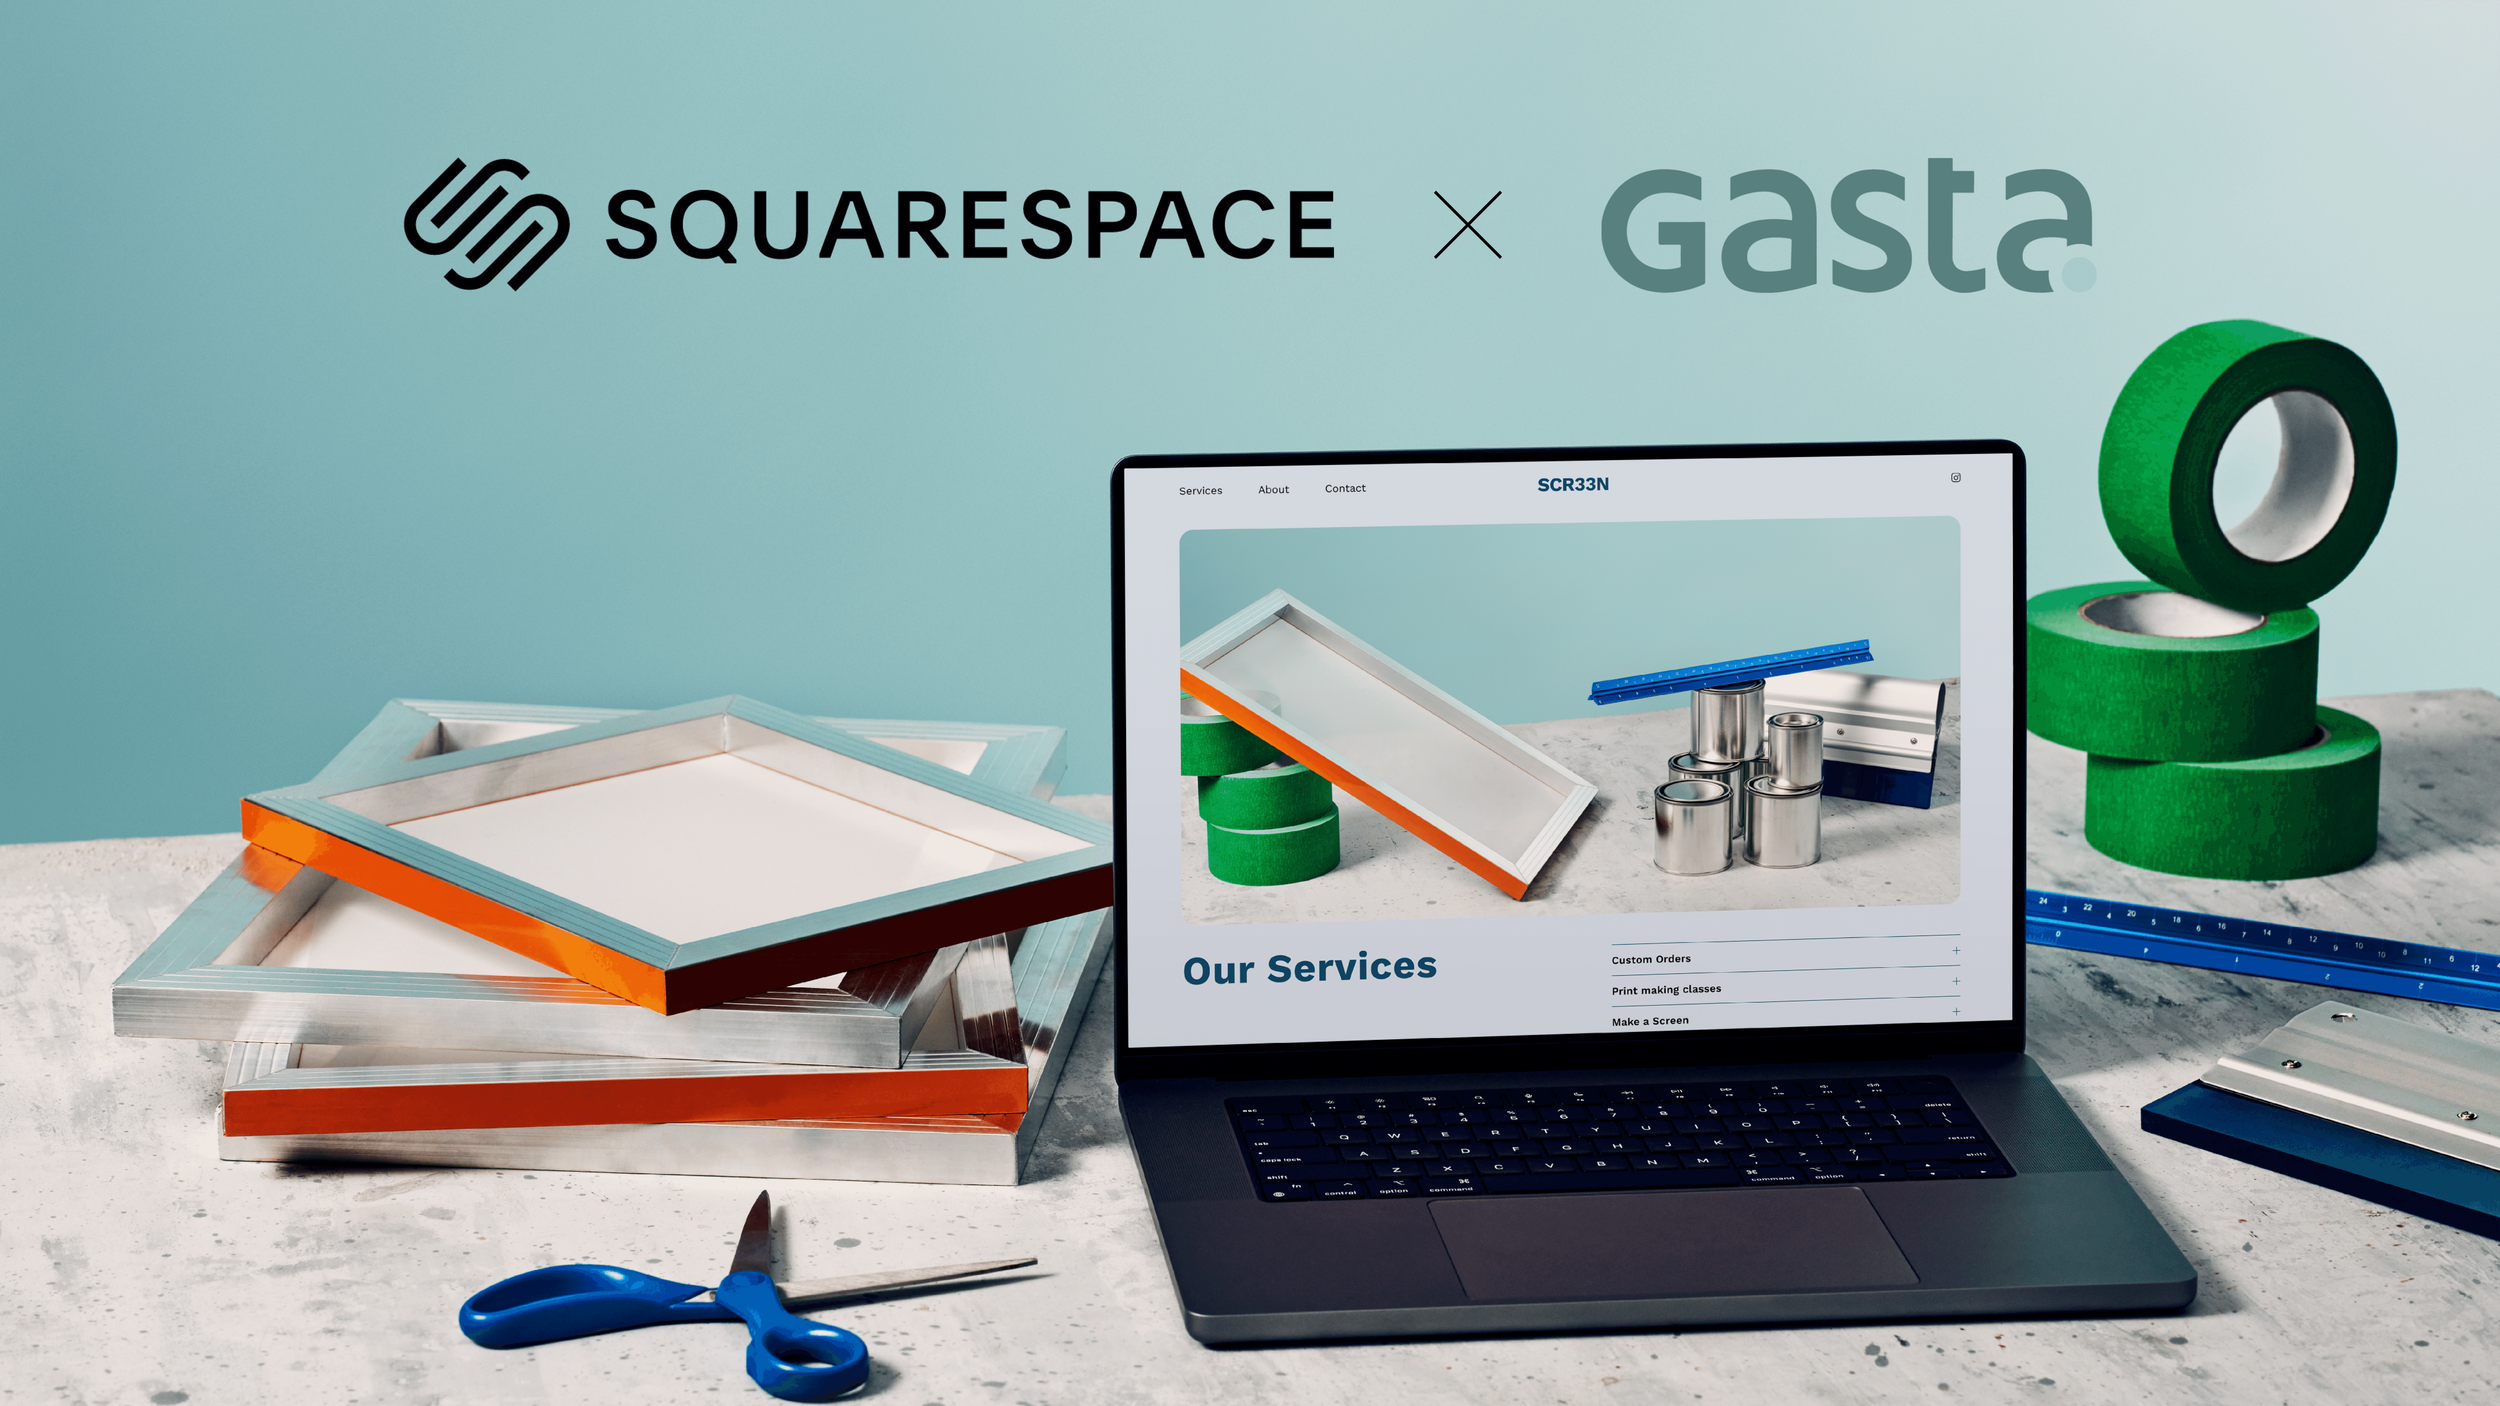 Squarespace logo and Gasta logo with laptop surrounded by construction materials